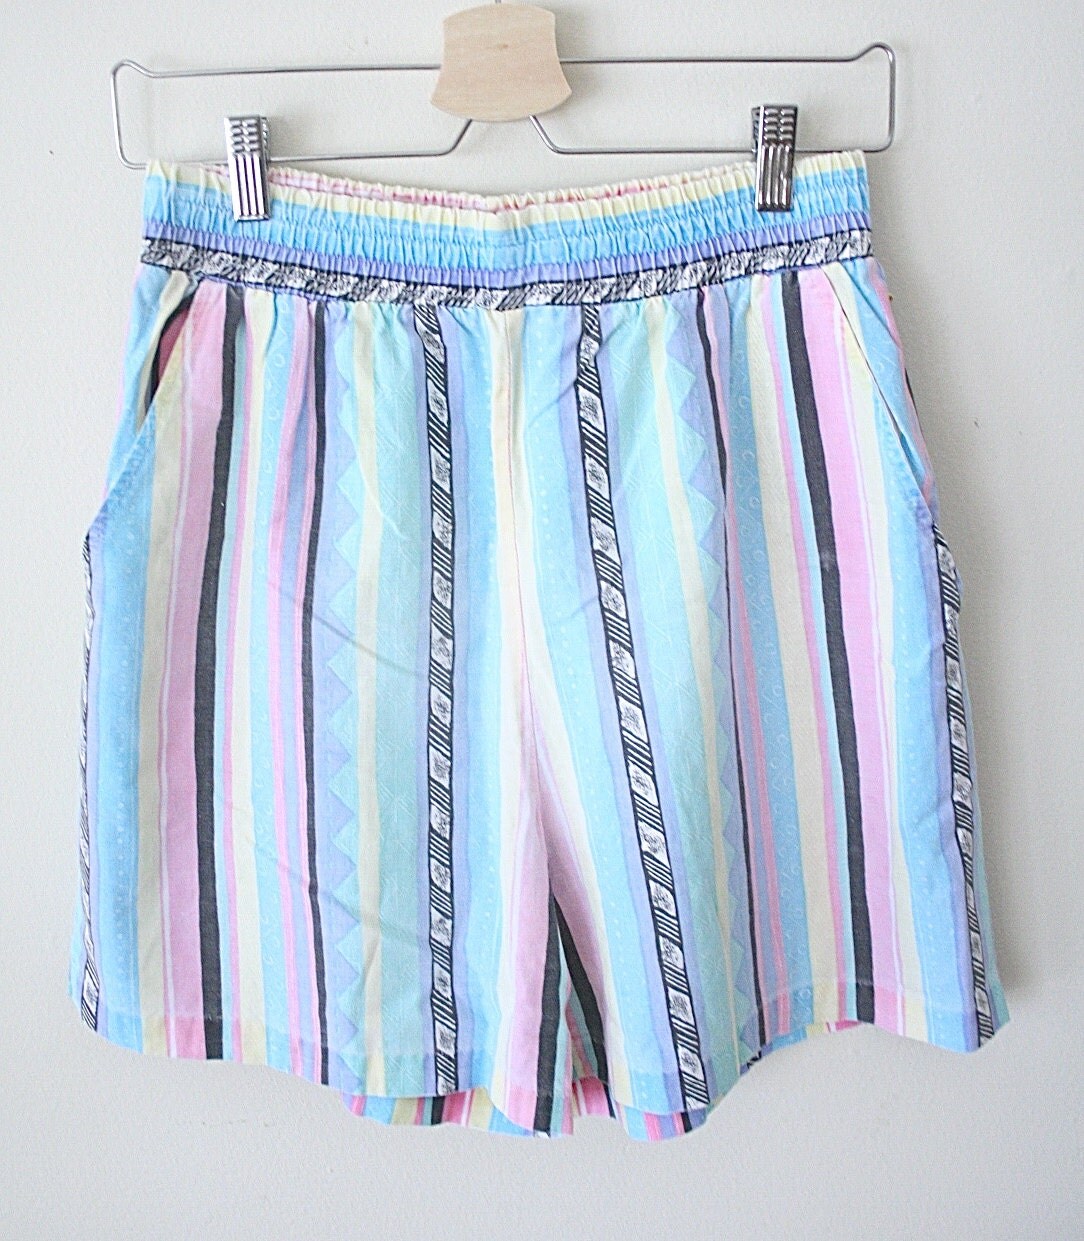 80s/90s Striped Shorts High Waisted Shorts by DownHouseVintage